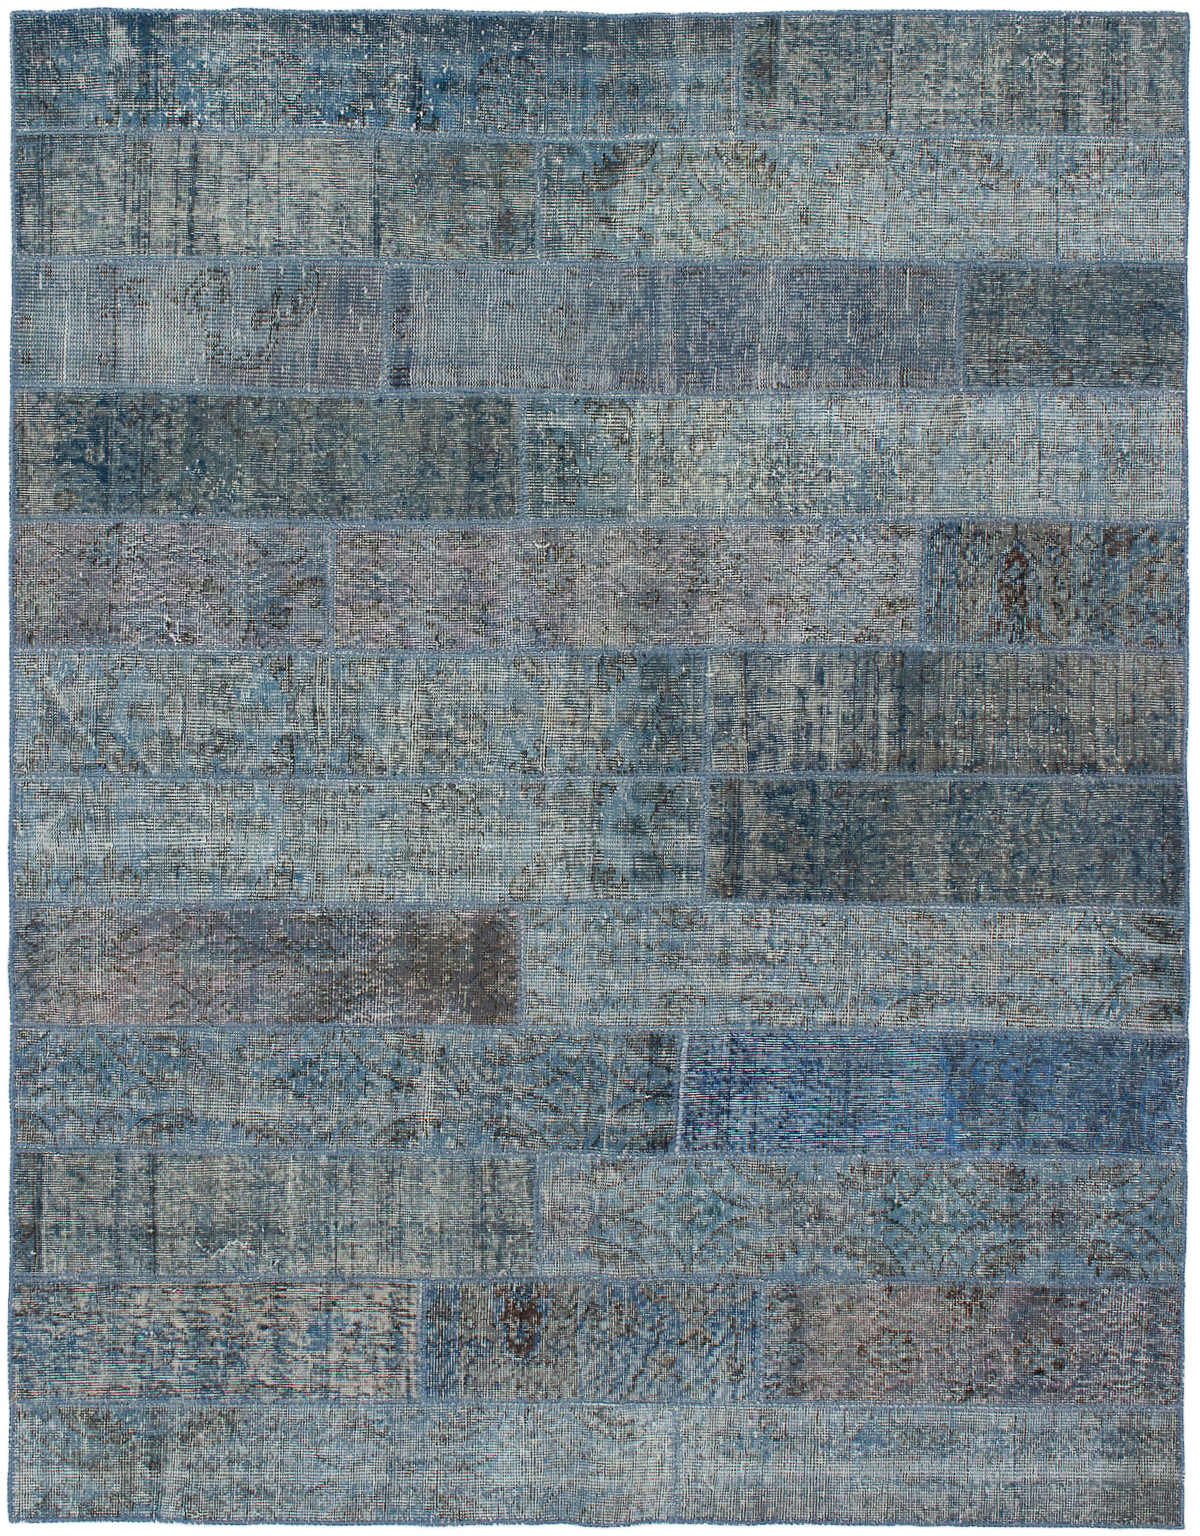 Hand-knotted Color Transition Patch Turquoise Wool Rug 5'11" x 7'9" Size: 5'11" x 7'9"  